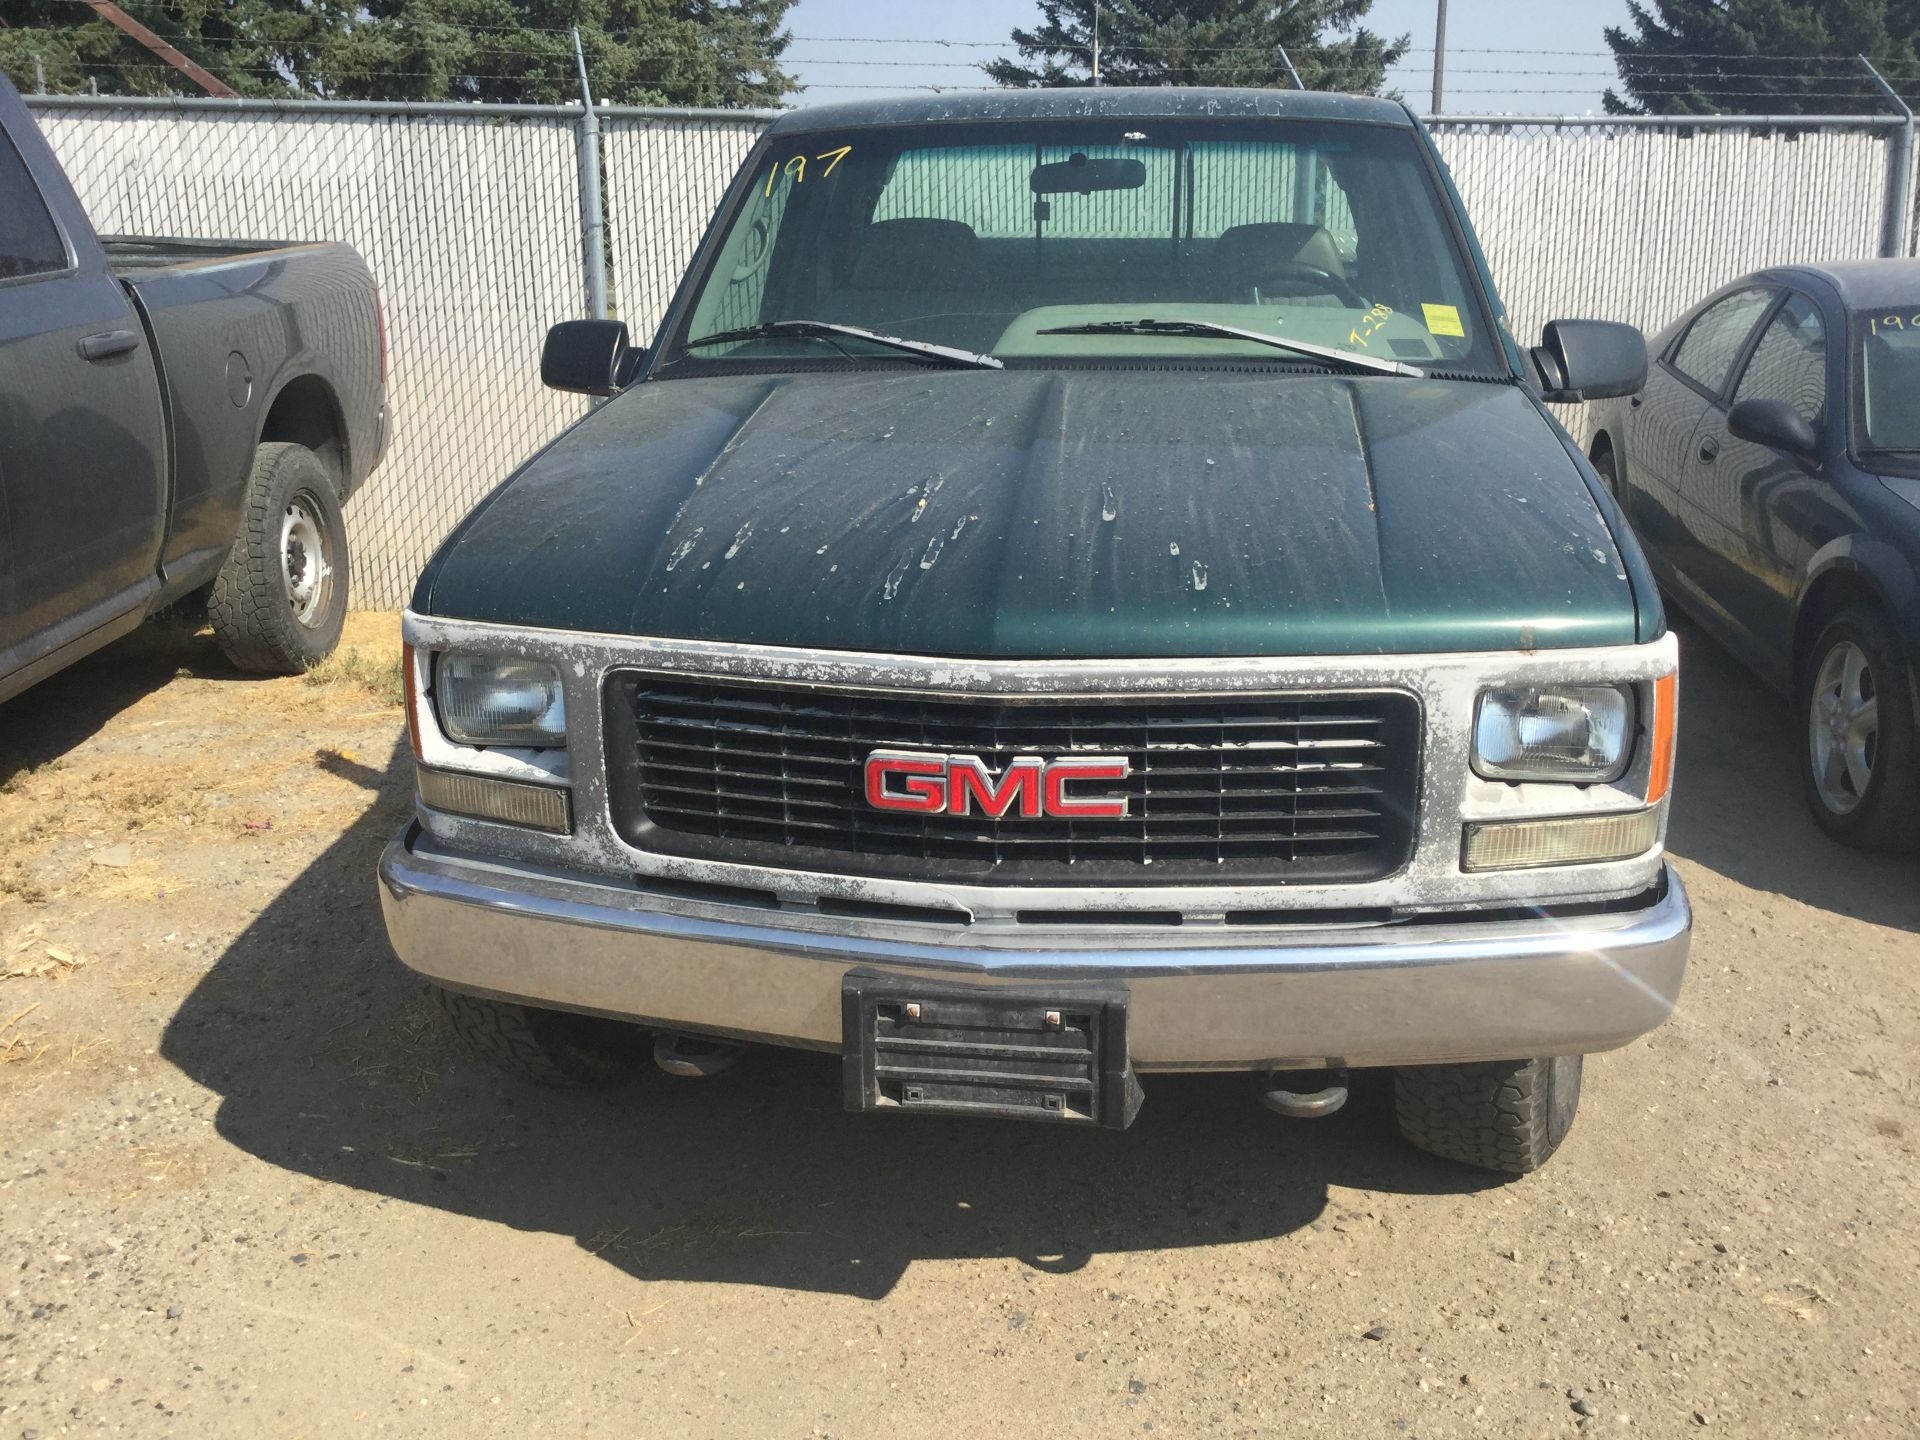 Year: 1996 Make: GMC Model: 1/2T Type: Pickup Vin#: 539146 Mileage/Hours: 178977 5.7L, 4x4, 5sp, XC, - Image 2 of 3